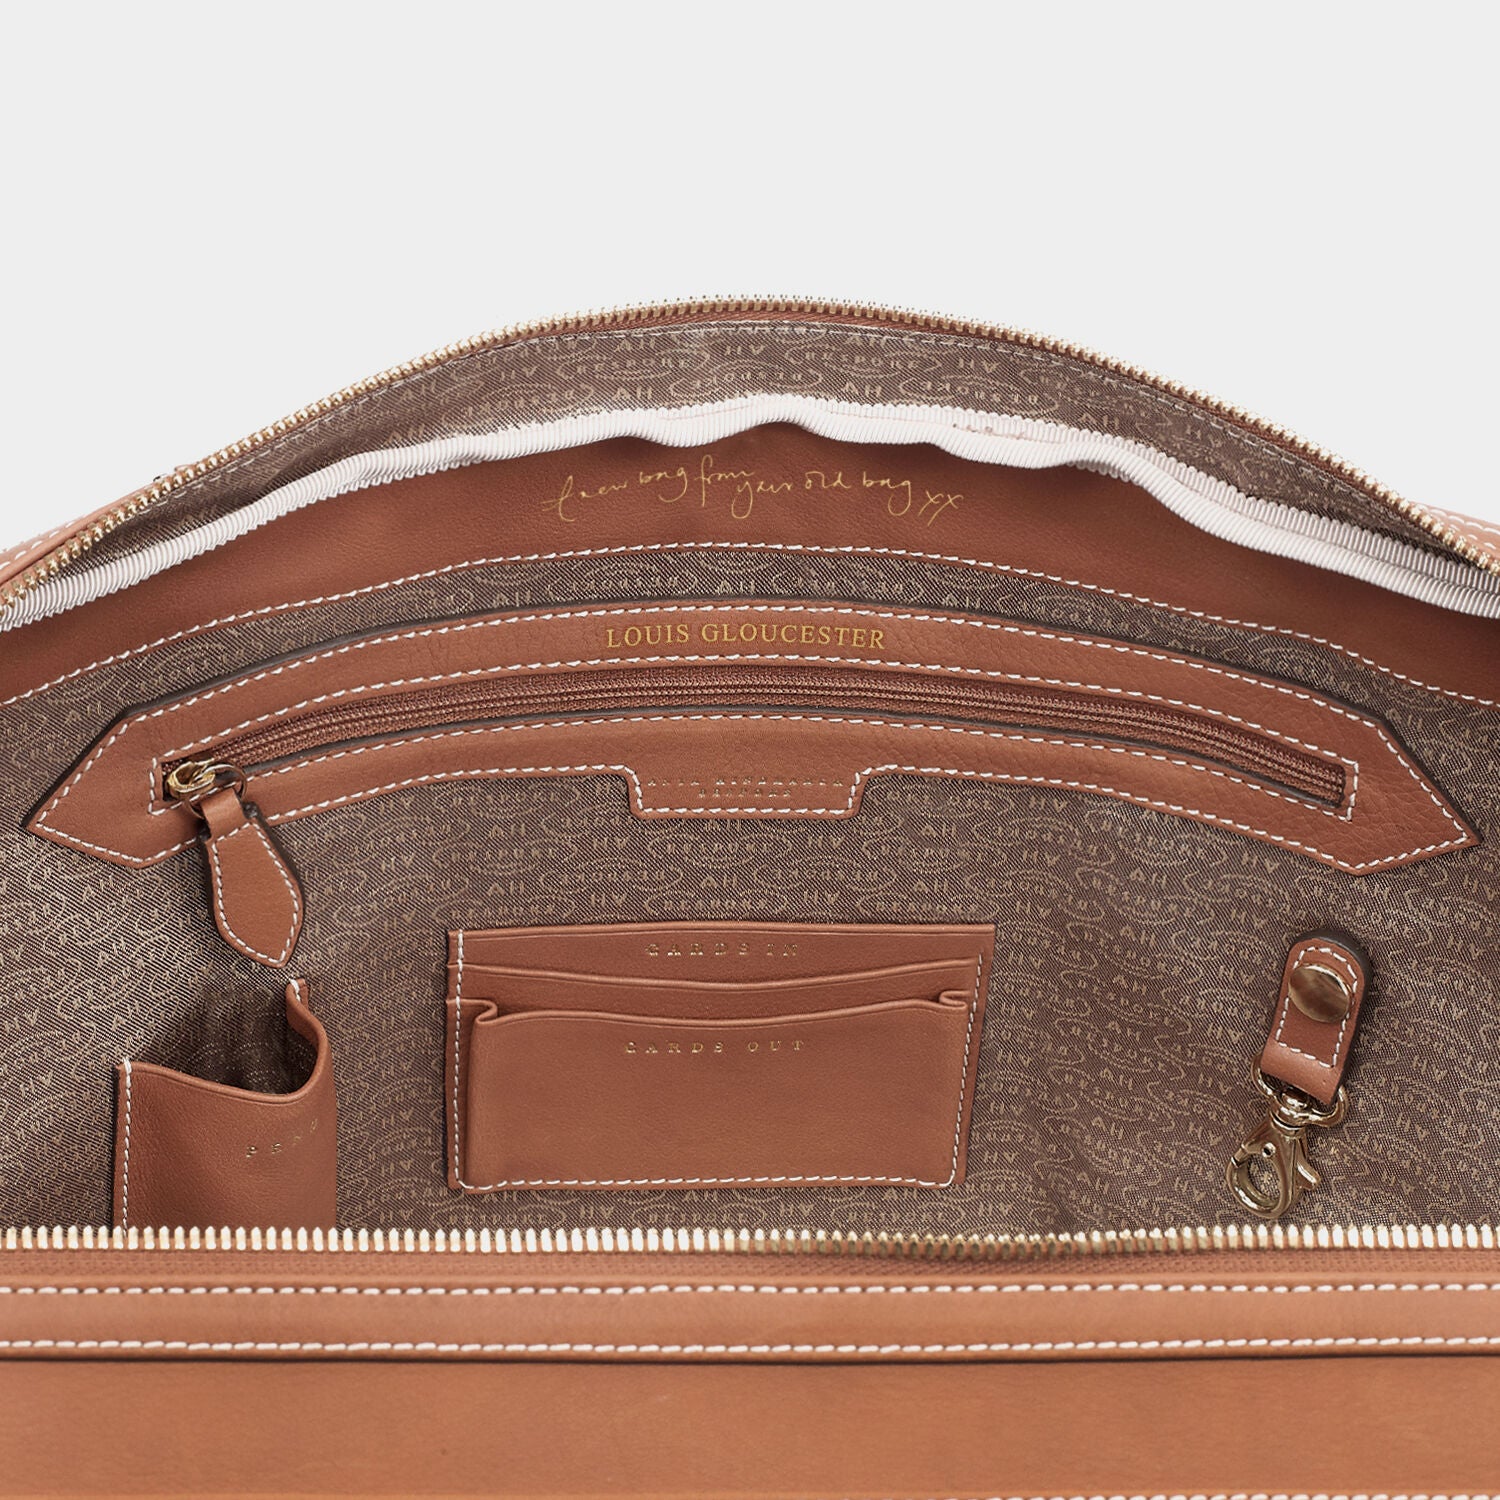 Bespoke Seymour -

                  
                    Butter Leather in Tan -
                  

                  Anya Hindmarch US
